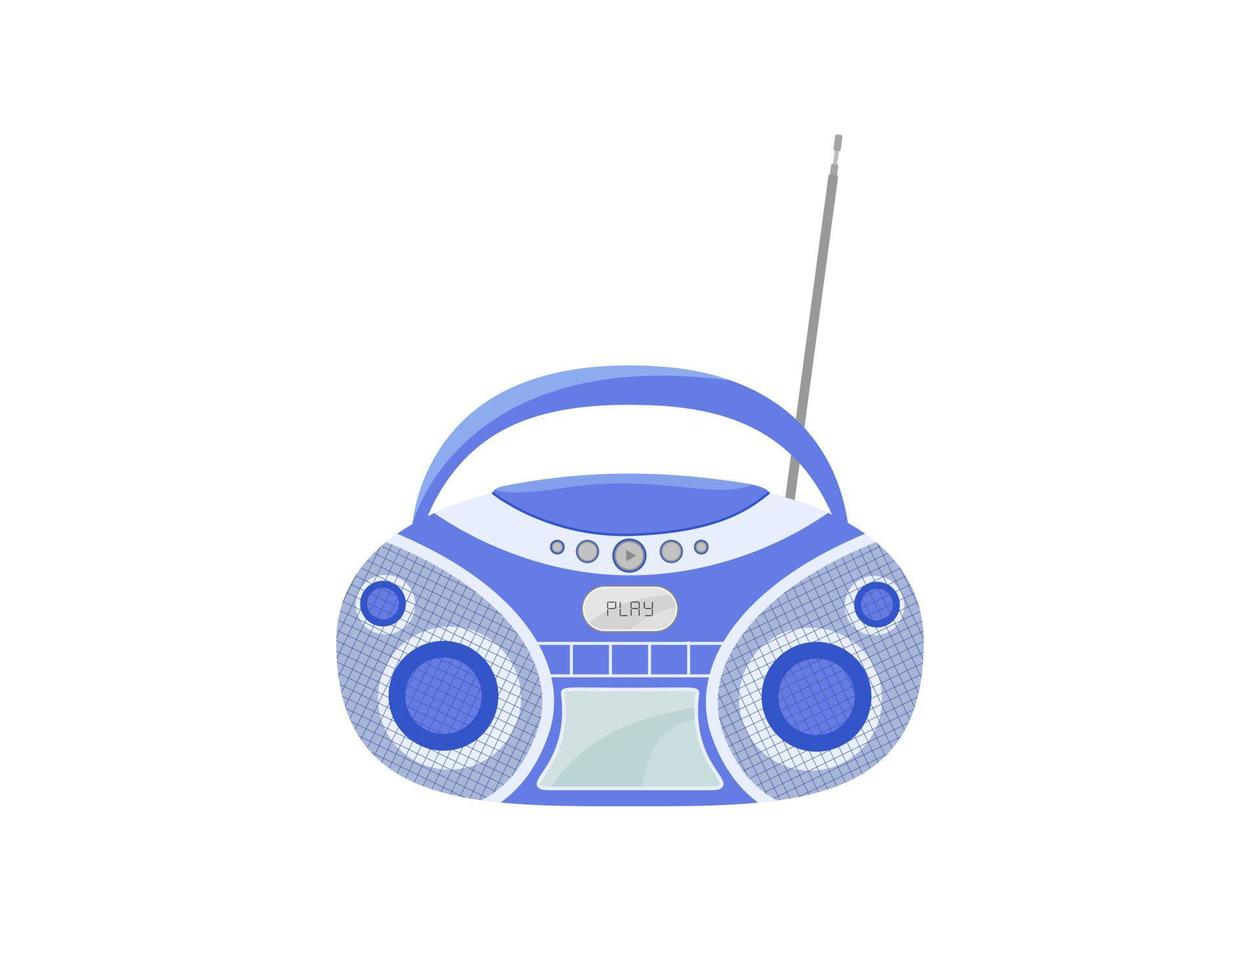 CD recorder isolated. 90s CD stereo boombox on white background. Mp3 music player. Vector flat retro illustration